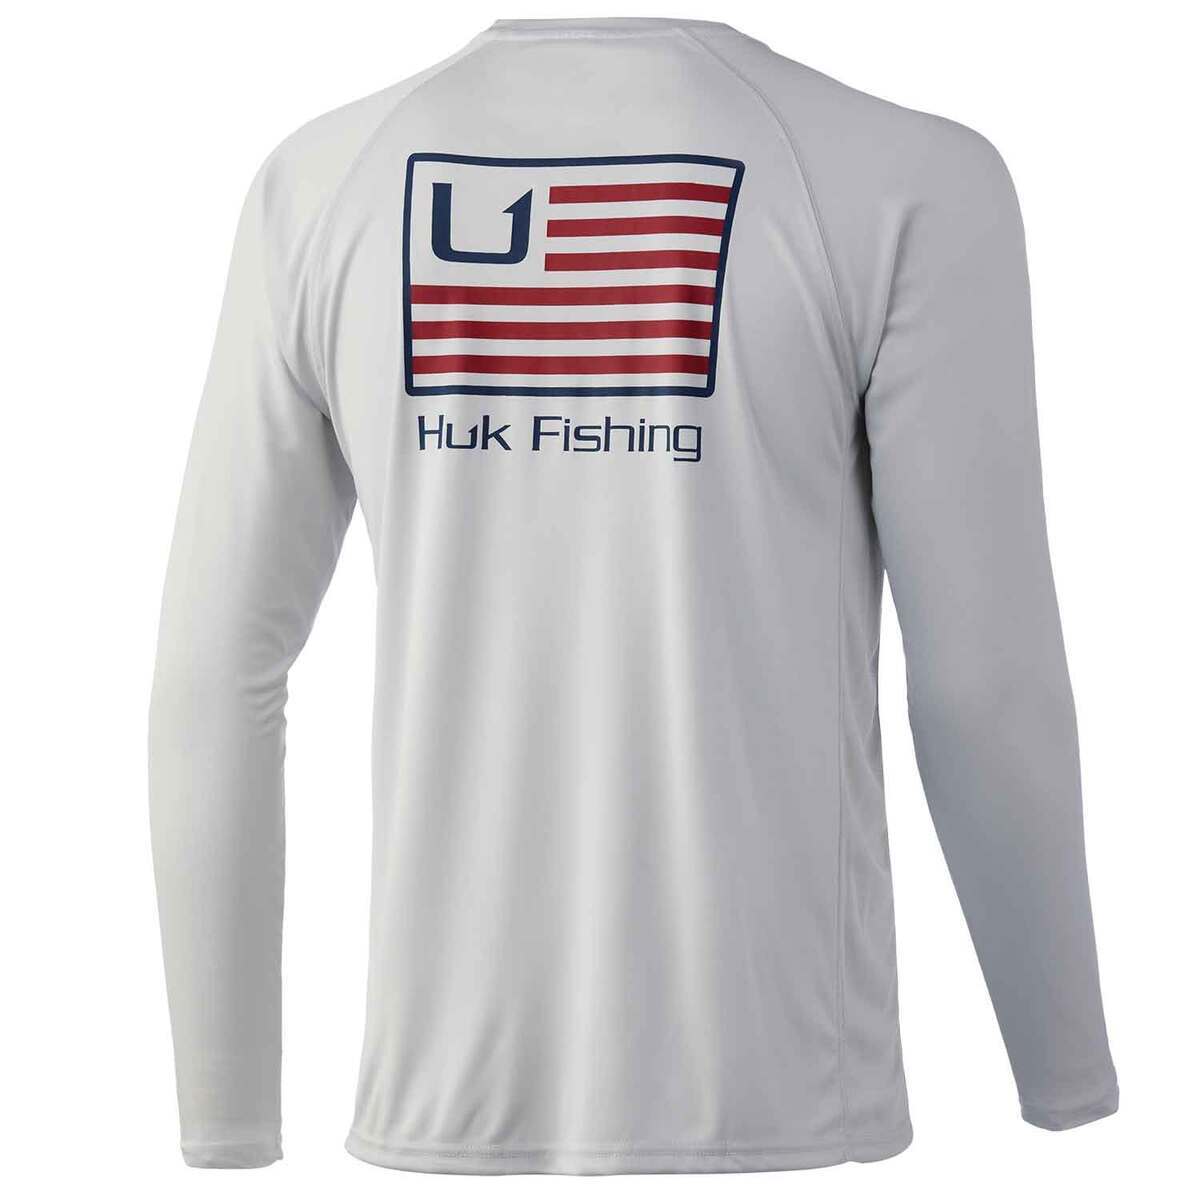 Huk and Bars Pursuit Long-Sleeve Shirt for Men - Moss - L